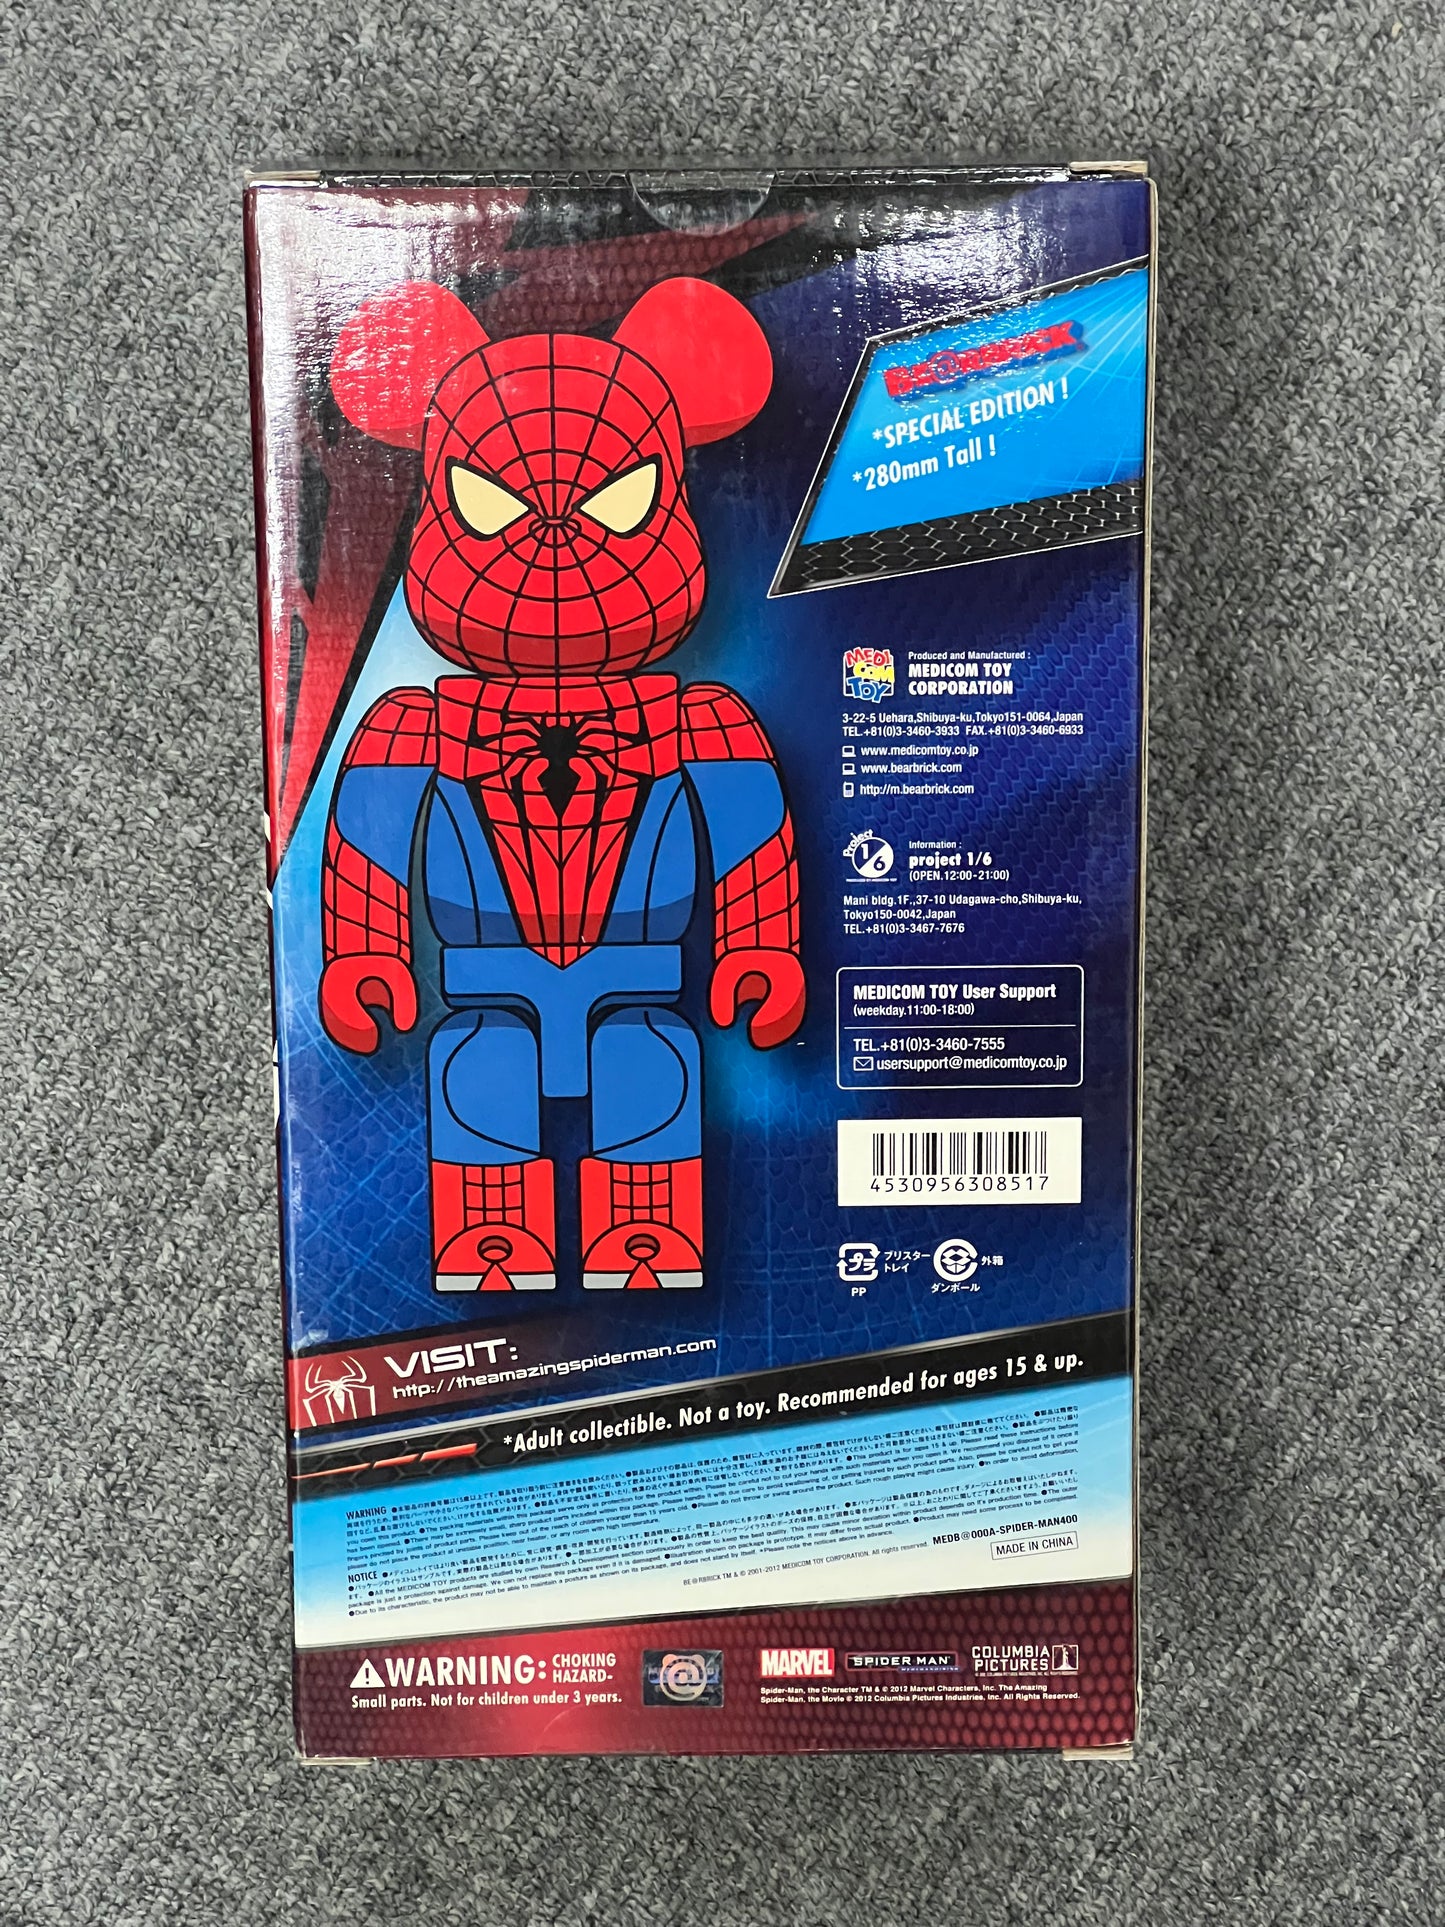 (In-stock) BE@RBRCK THE AMAZING SPIDER-MAN 400%